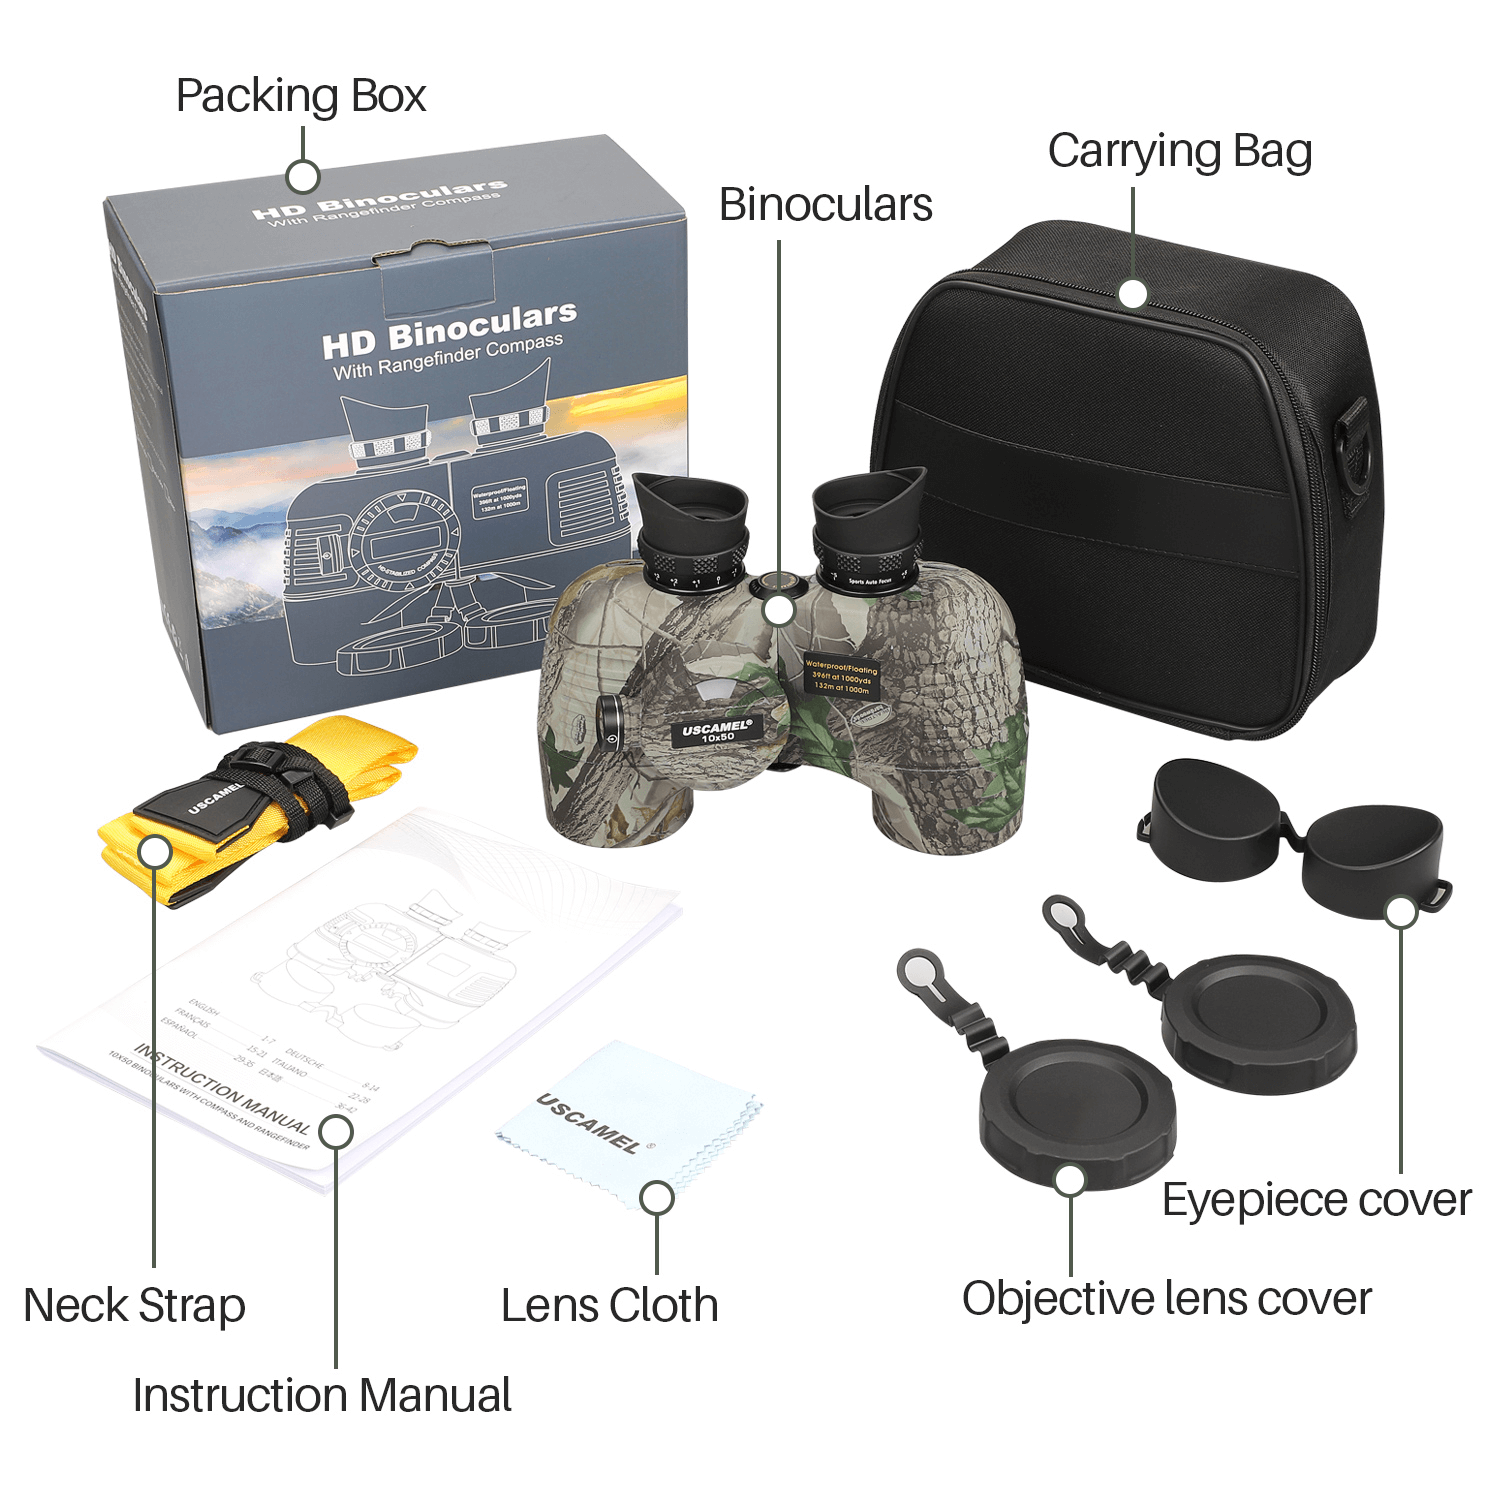 uw116 package included with one main product, a fine carrying bag, a neck strap, one manual, a len cloth, eyepiece & objective lens cover